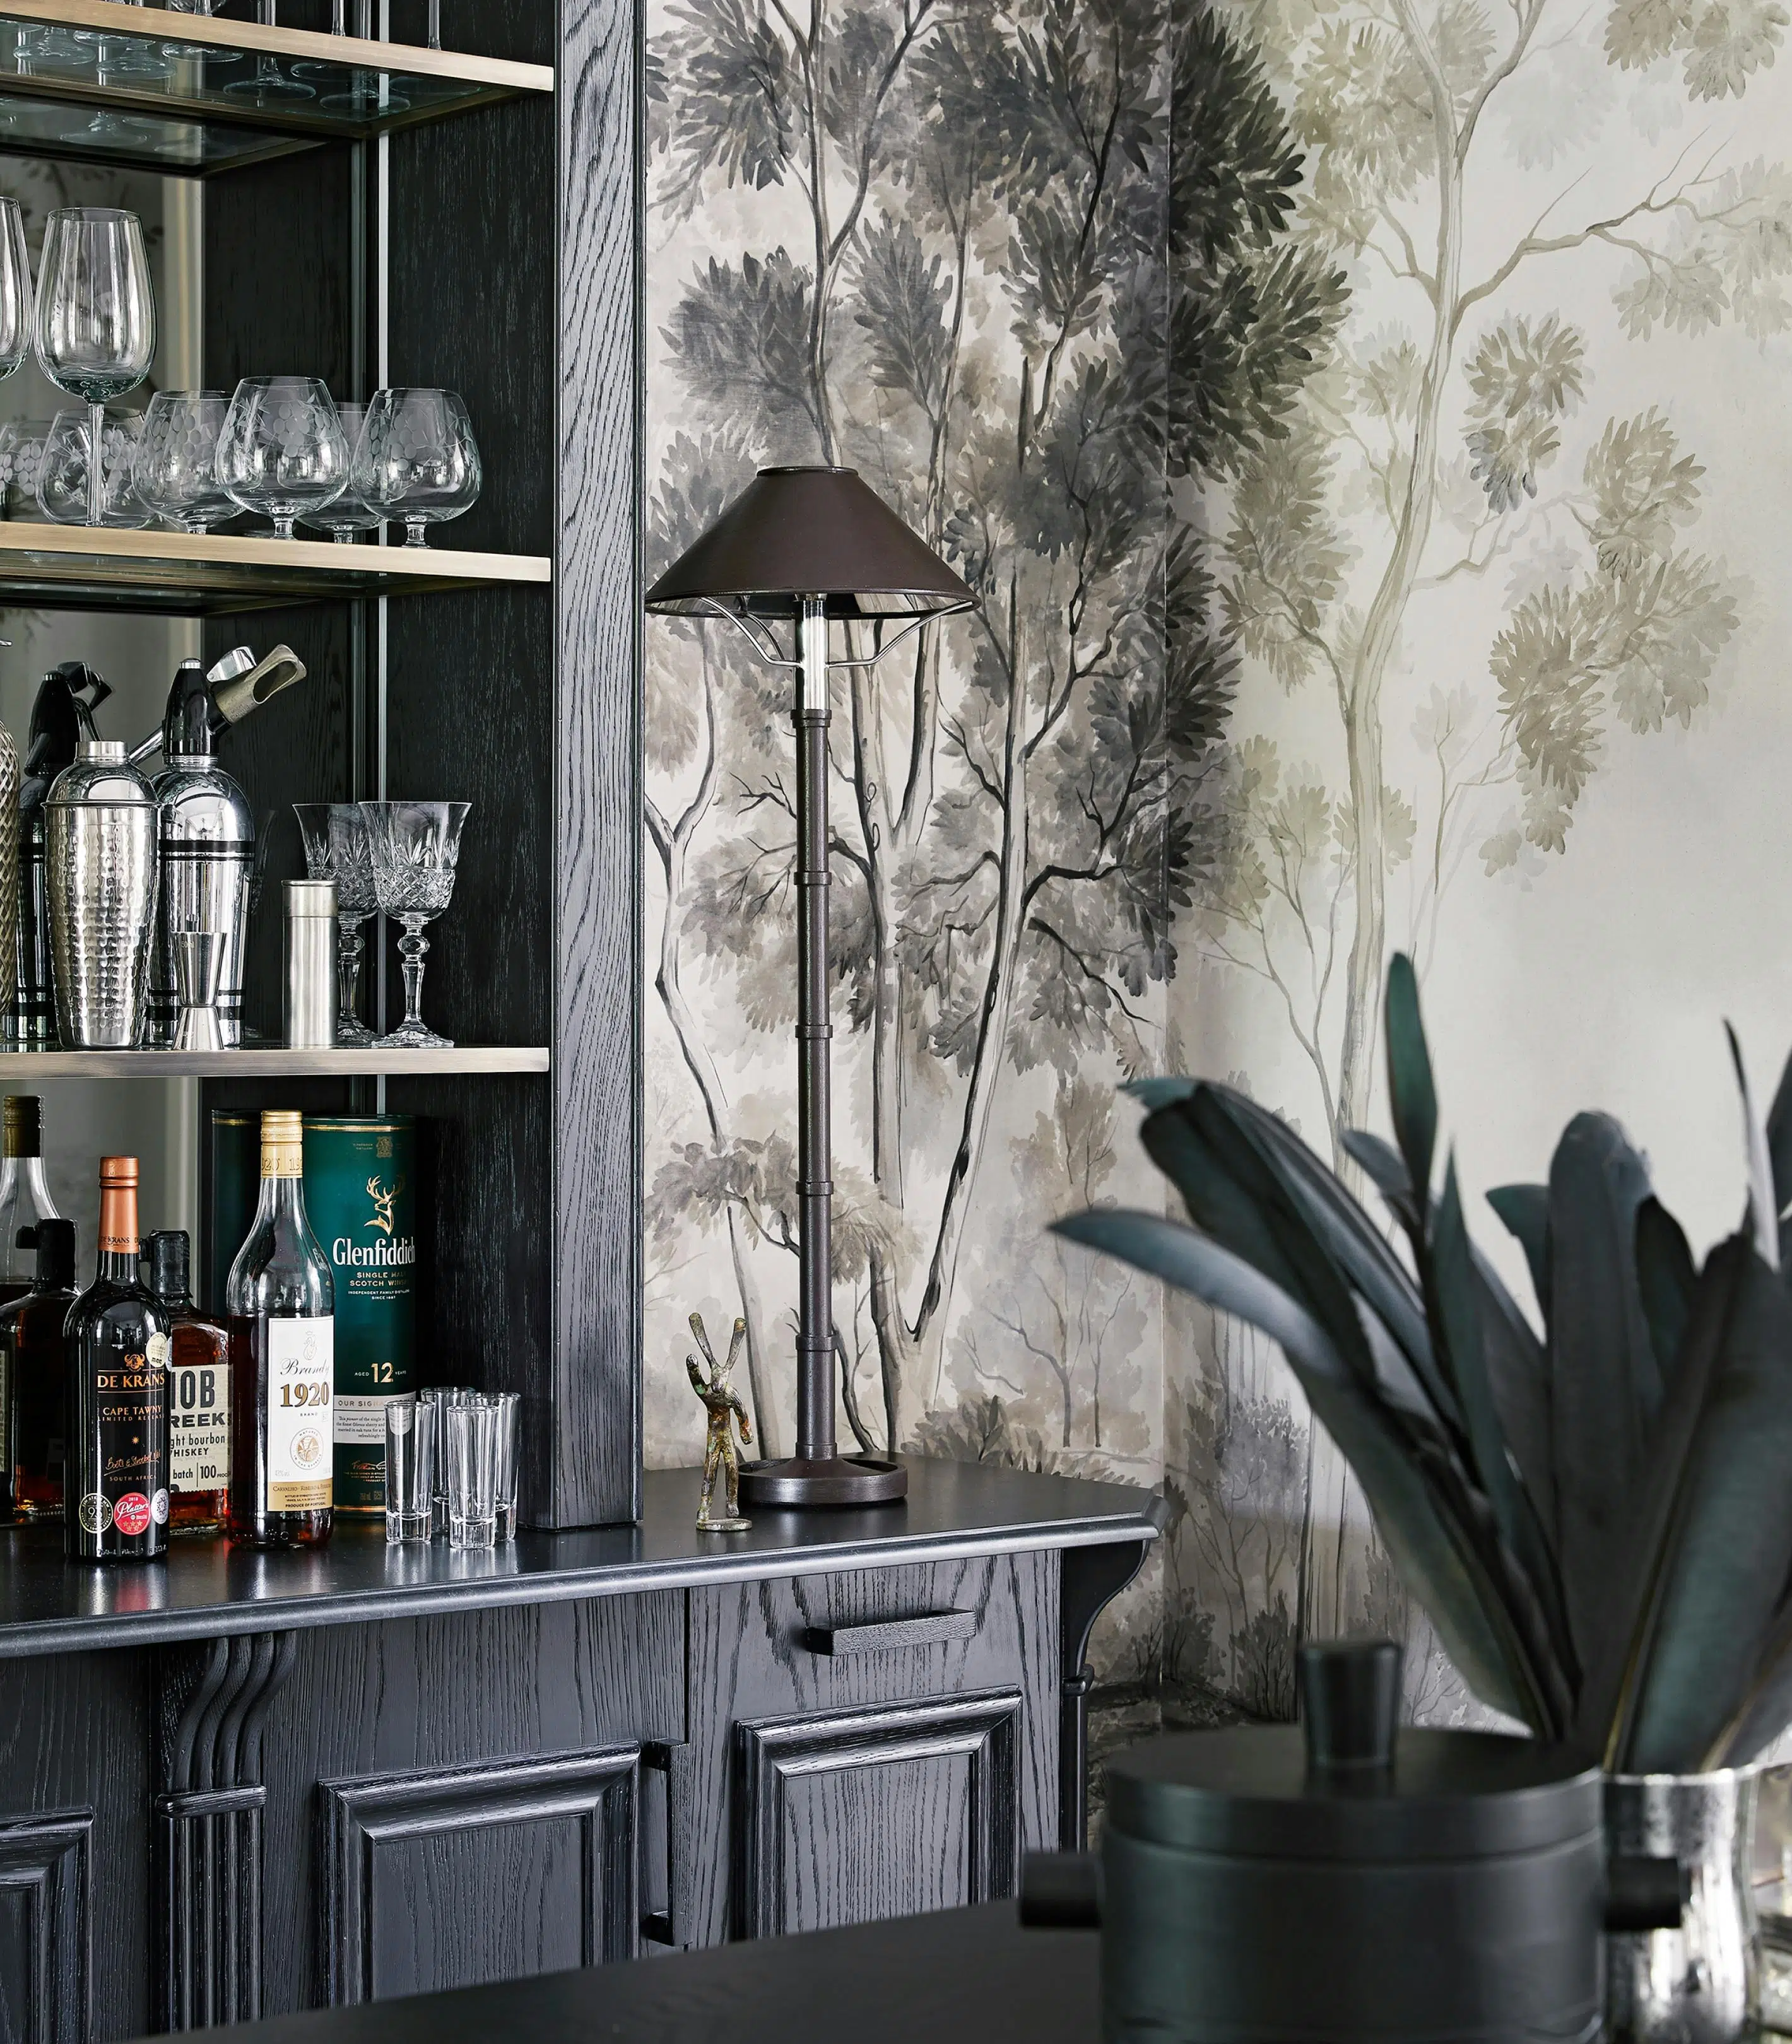 A lamp stands on a tall sideboard holding stemware, cocktail shakers and bottles of whisky, bourbon and brandy. In the foreground is a leafy plant and in the background is wallpaper featuring grayscale watercolour illustrations of trees.